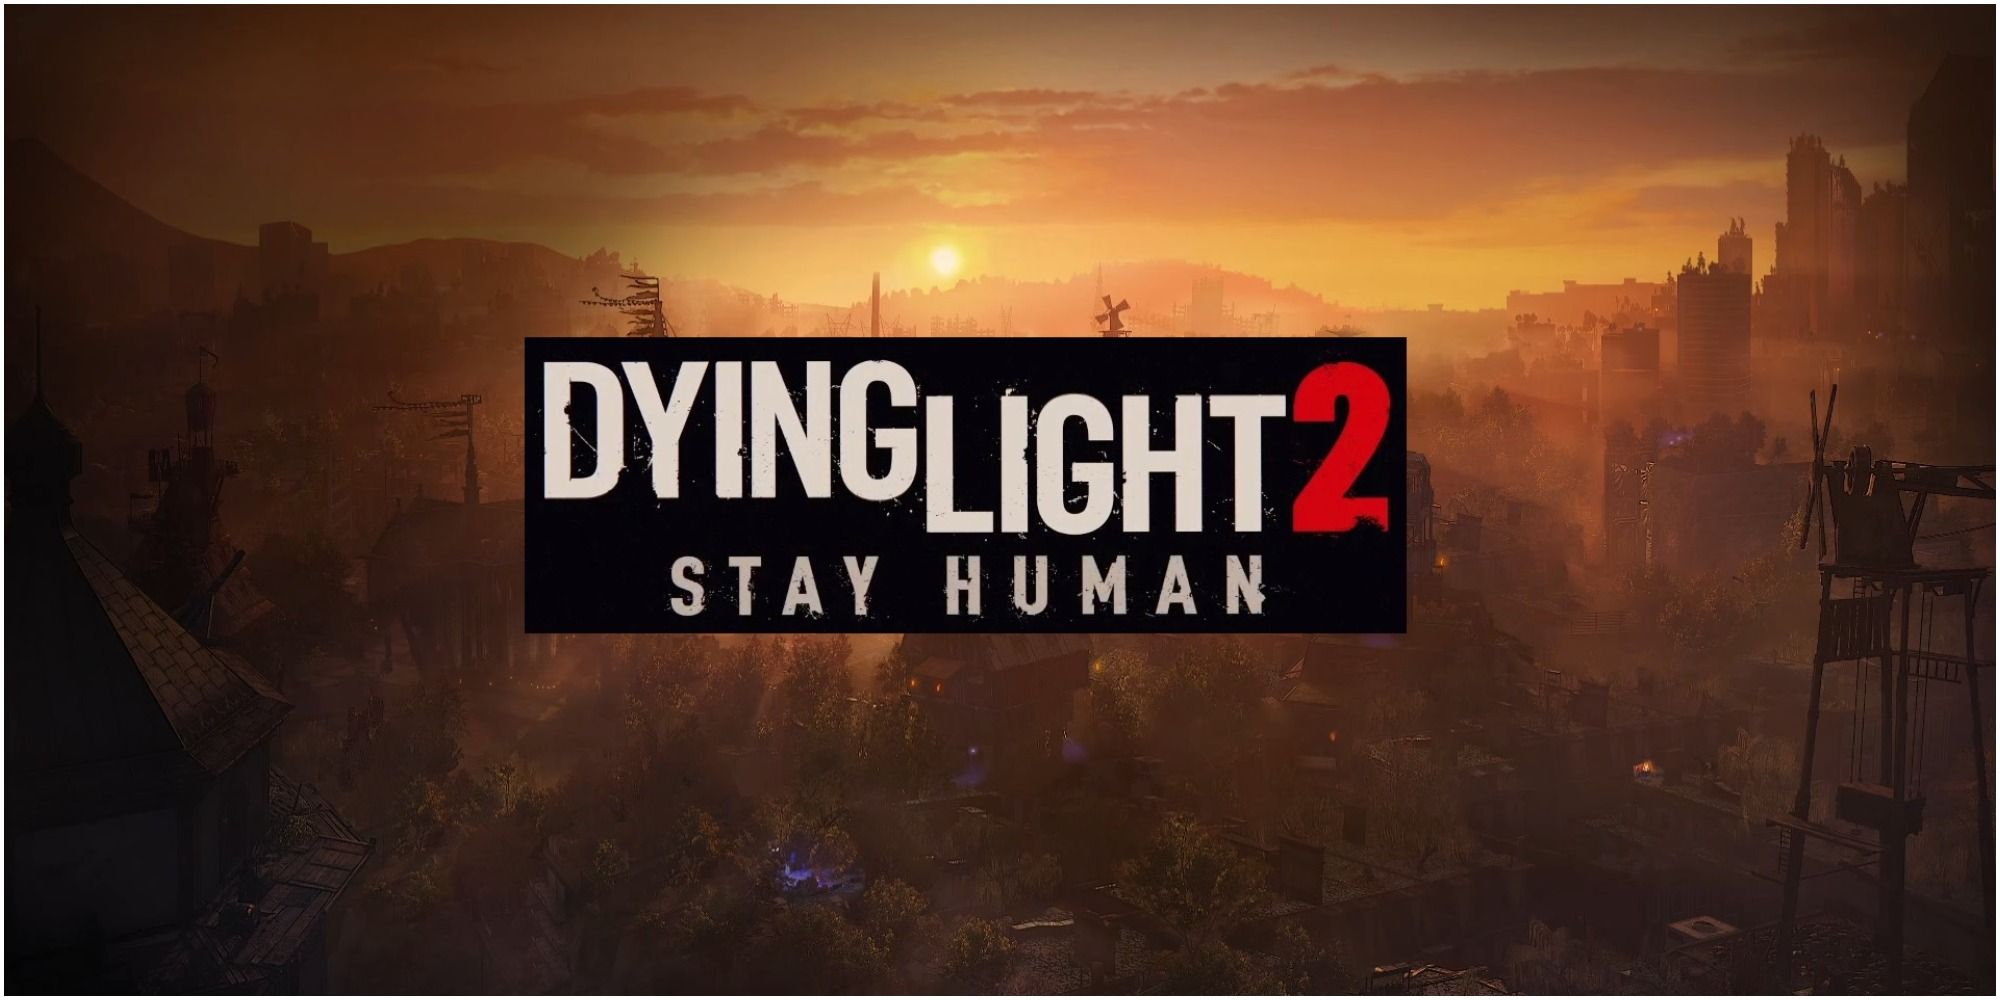 Dying Light 2 and The Walking Dead Crossover Revealed - News